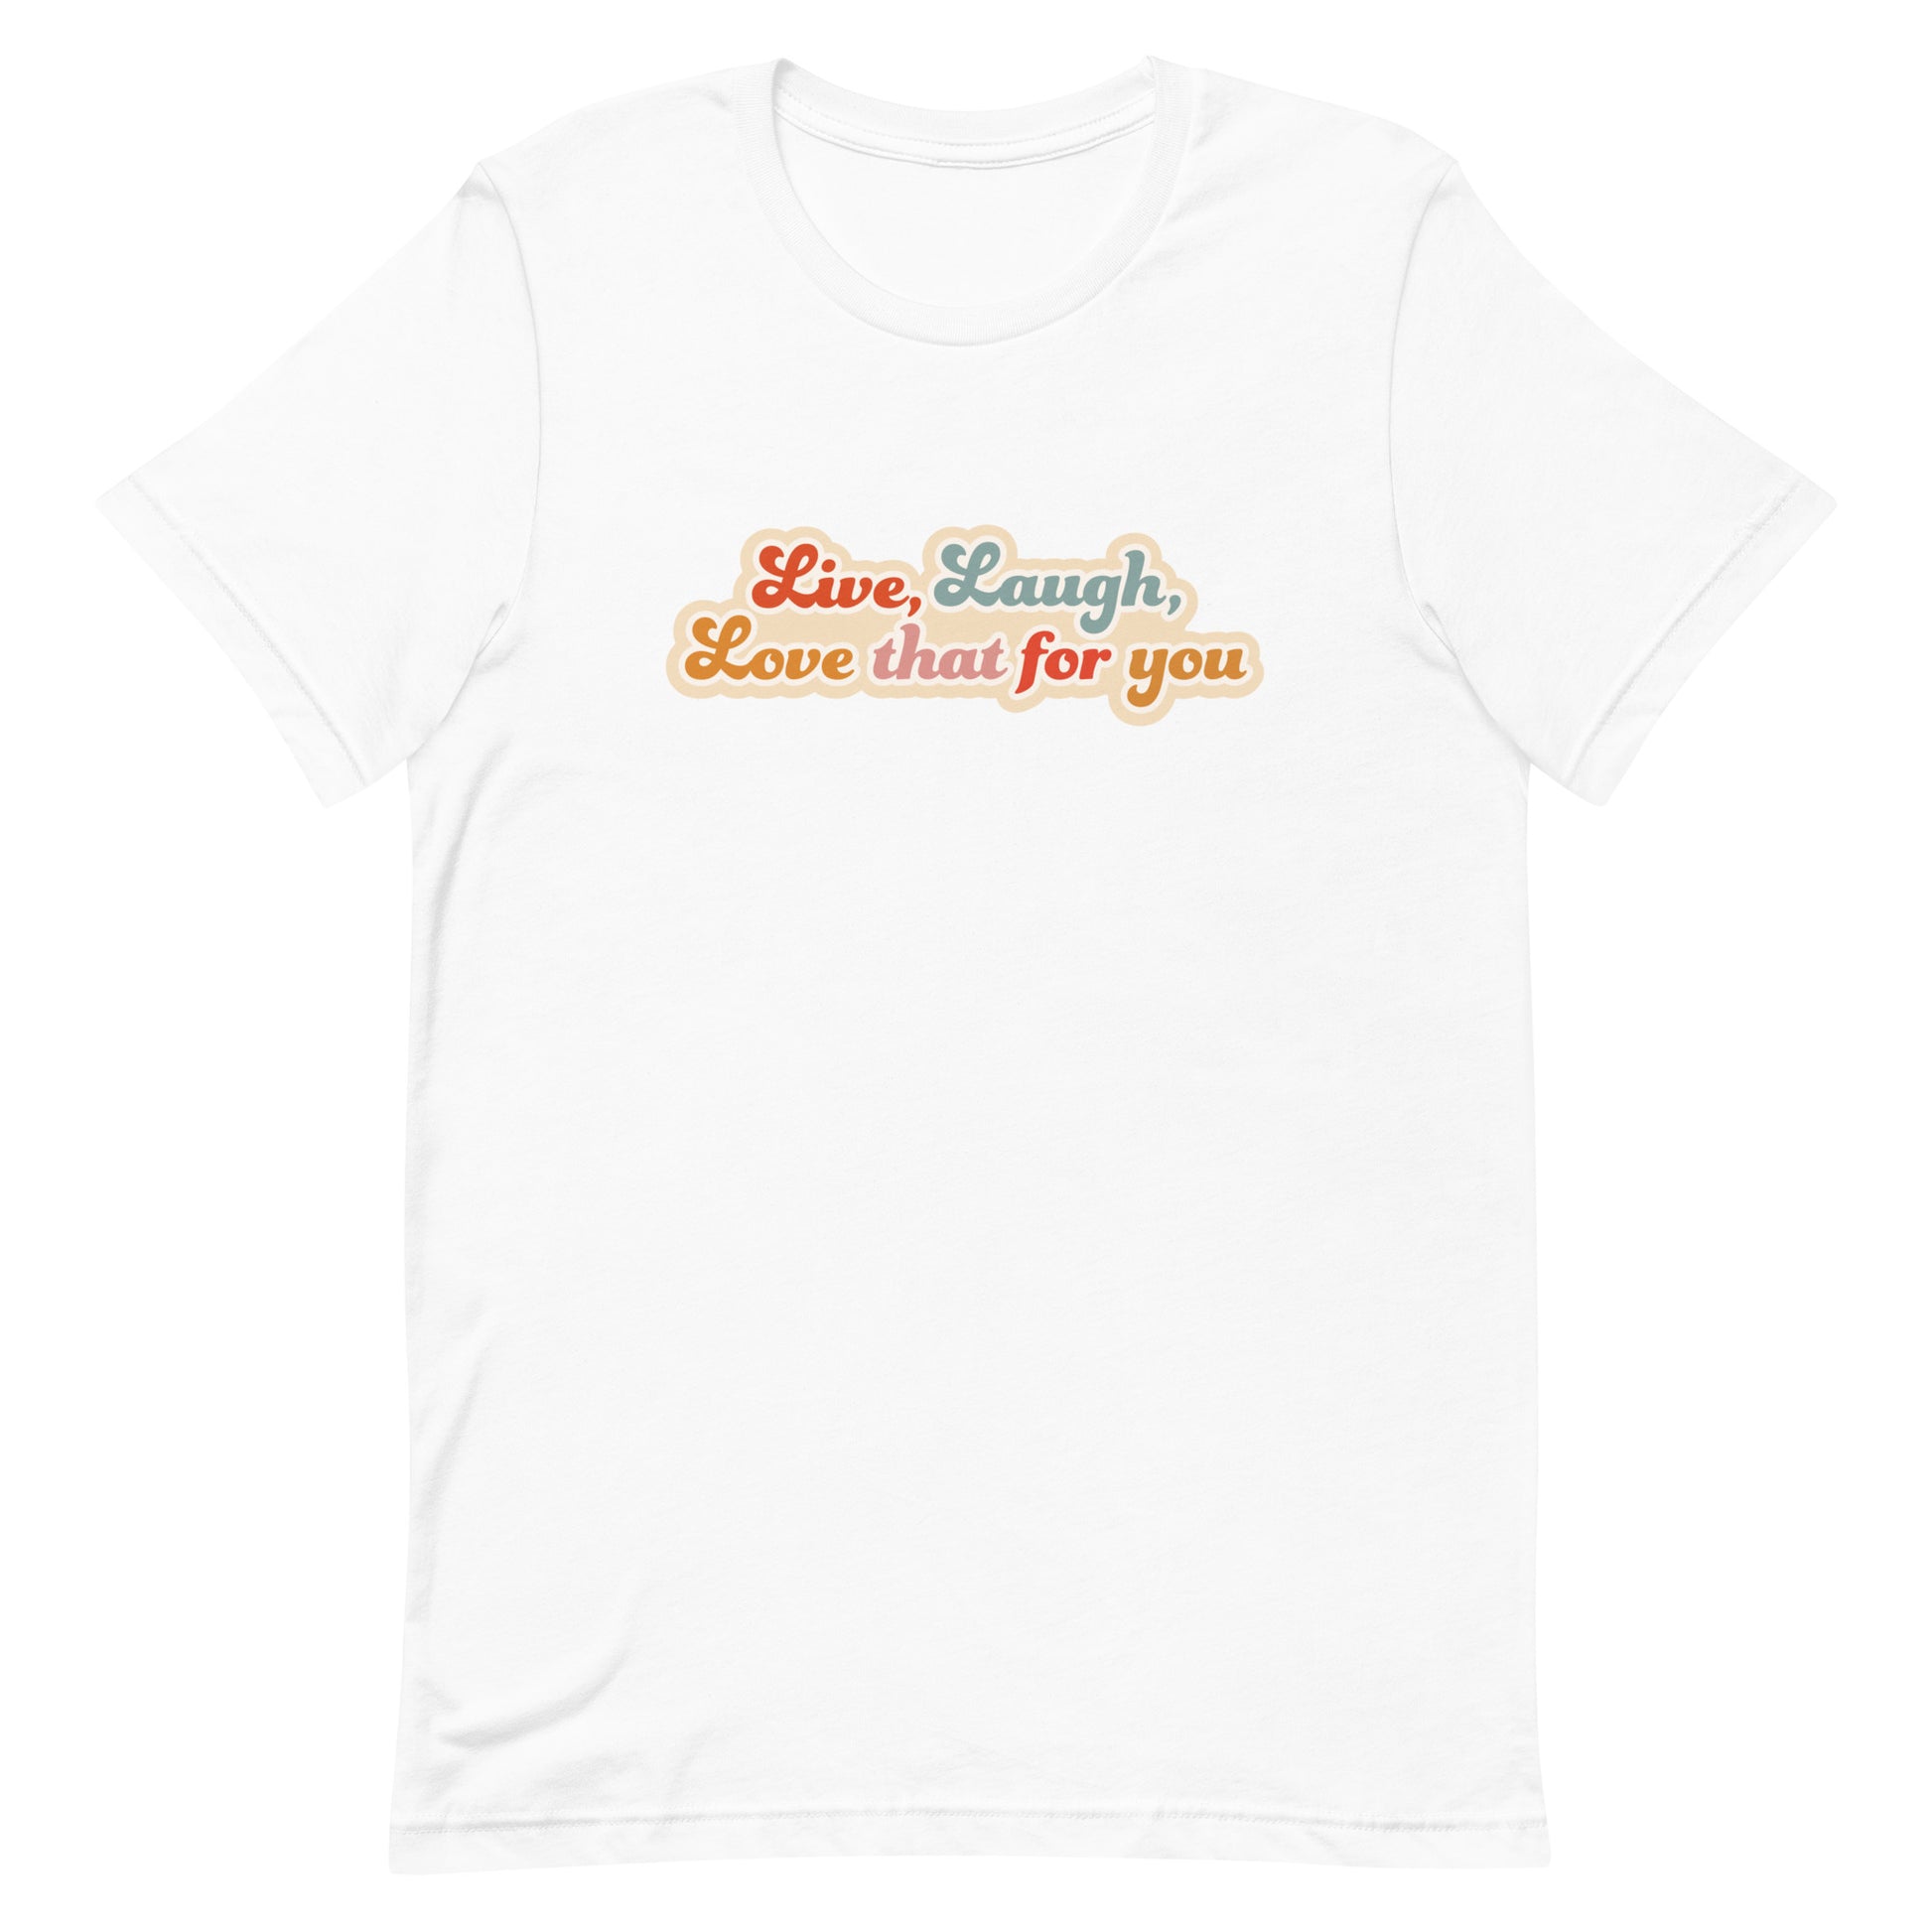 A white crewneck t-shirt featuring a cursive, colorful font that reads "Live, Laugh, Love that for you".